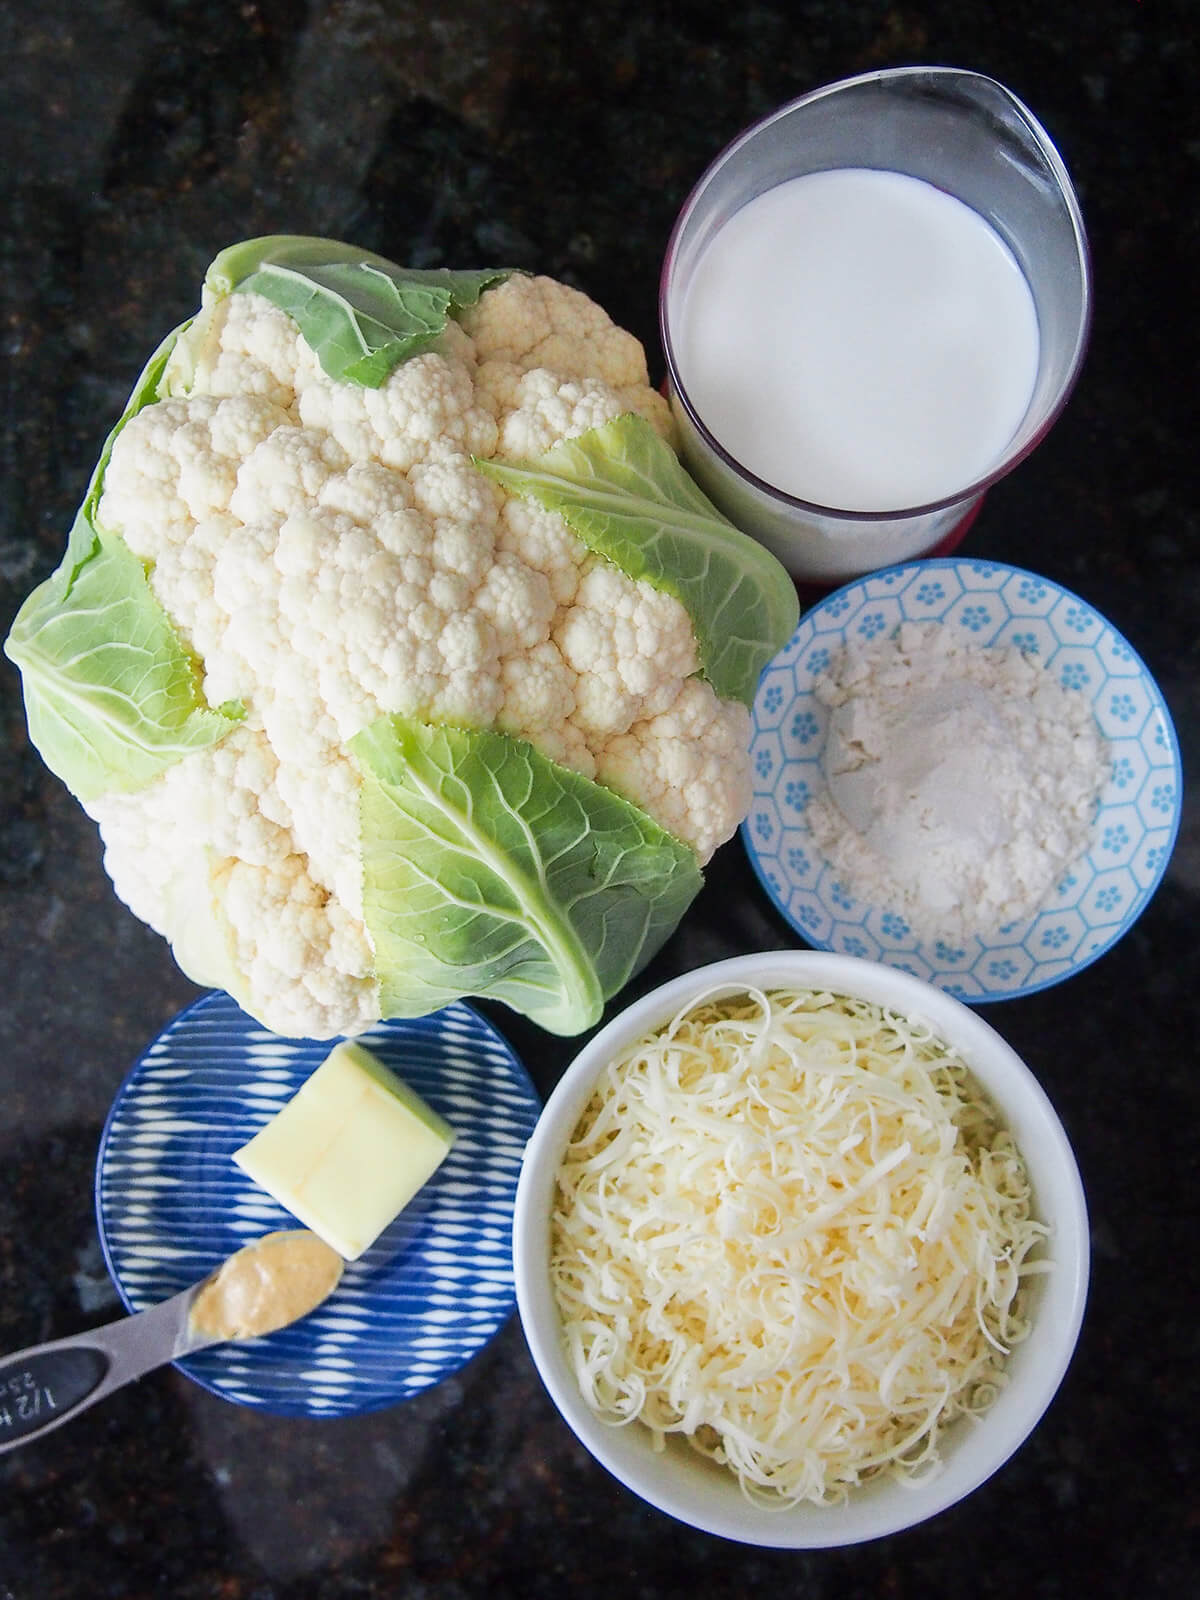 Cauliflower, bowl of cheese, flour, milk and dish with butter and mustard